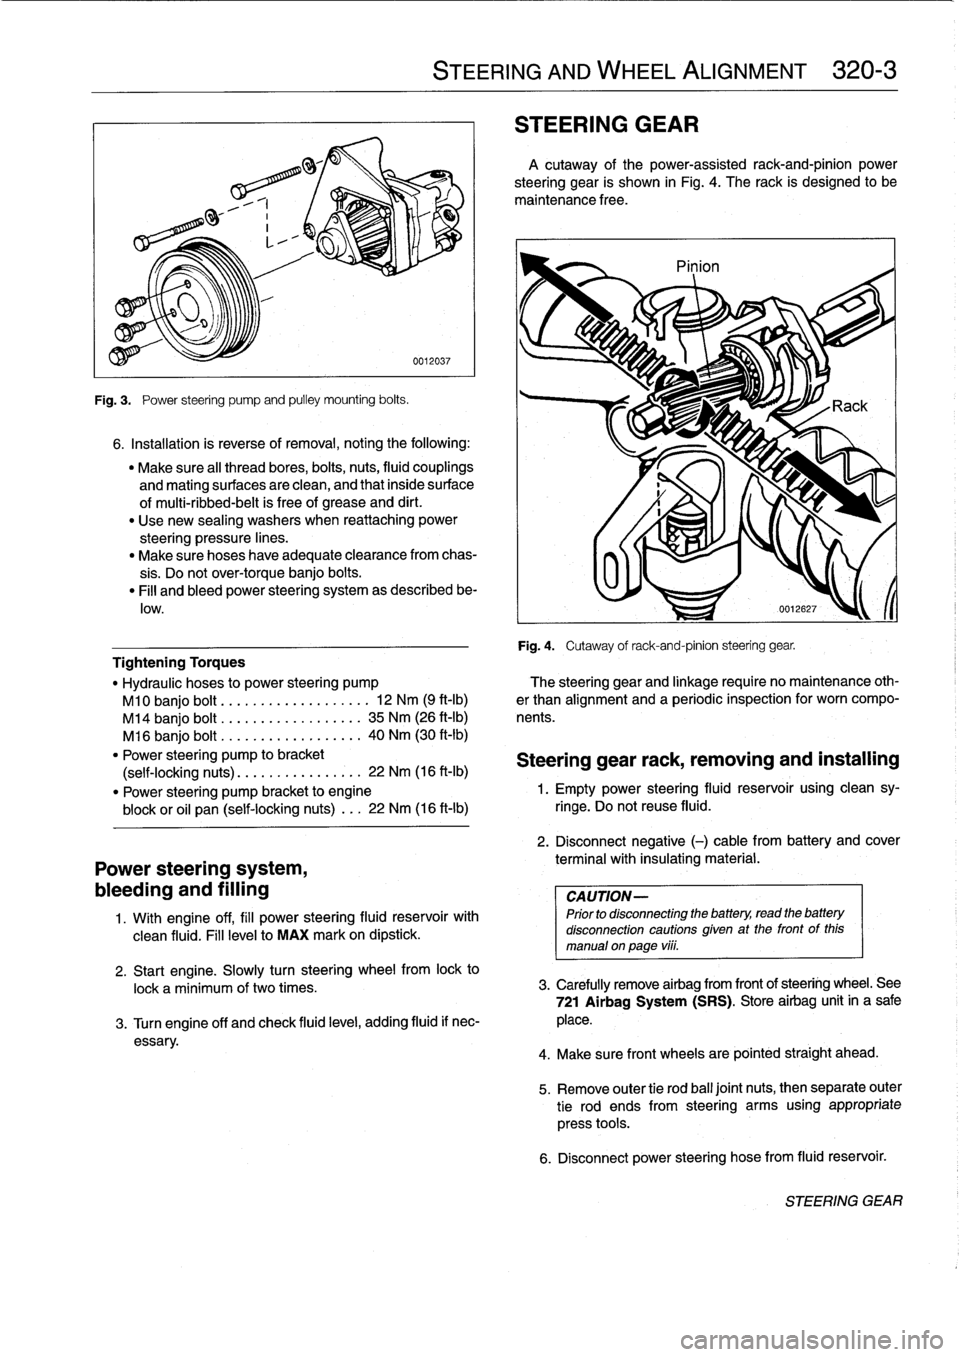 BMW 318i 1998 E36 Workshop Manual 
Fig
.
3
.

	

Power
steering
pump
and
pulley
mounting
bolts
.

6
.
Installation
is
reverse
of
removal,
noting
the
following
:

"
Make
sure
al¡
thread
bores,
bolts,
nuts,
fluid
couplings

and
mating
